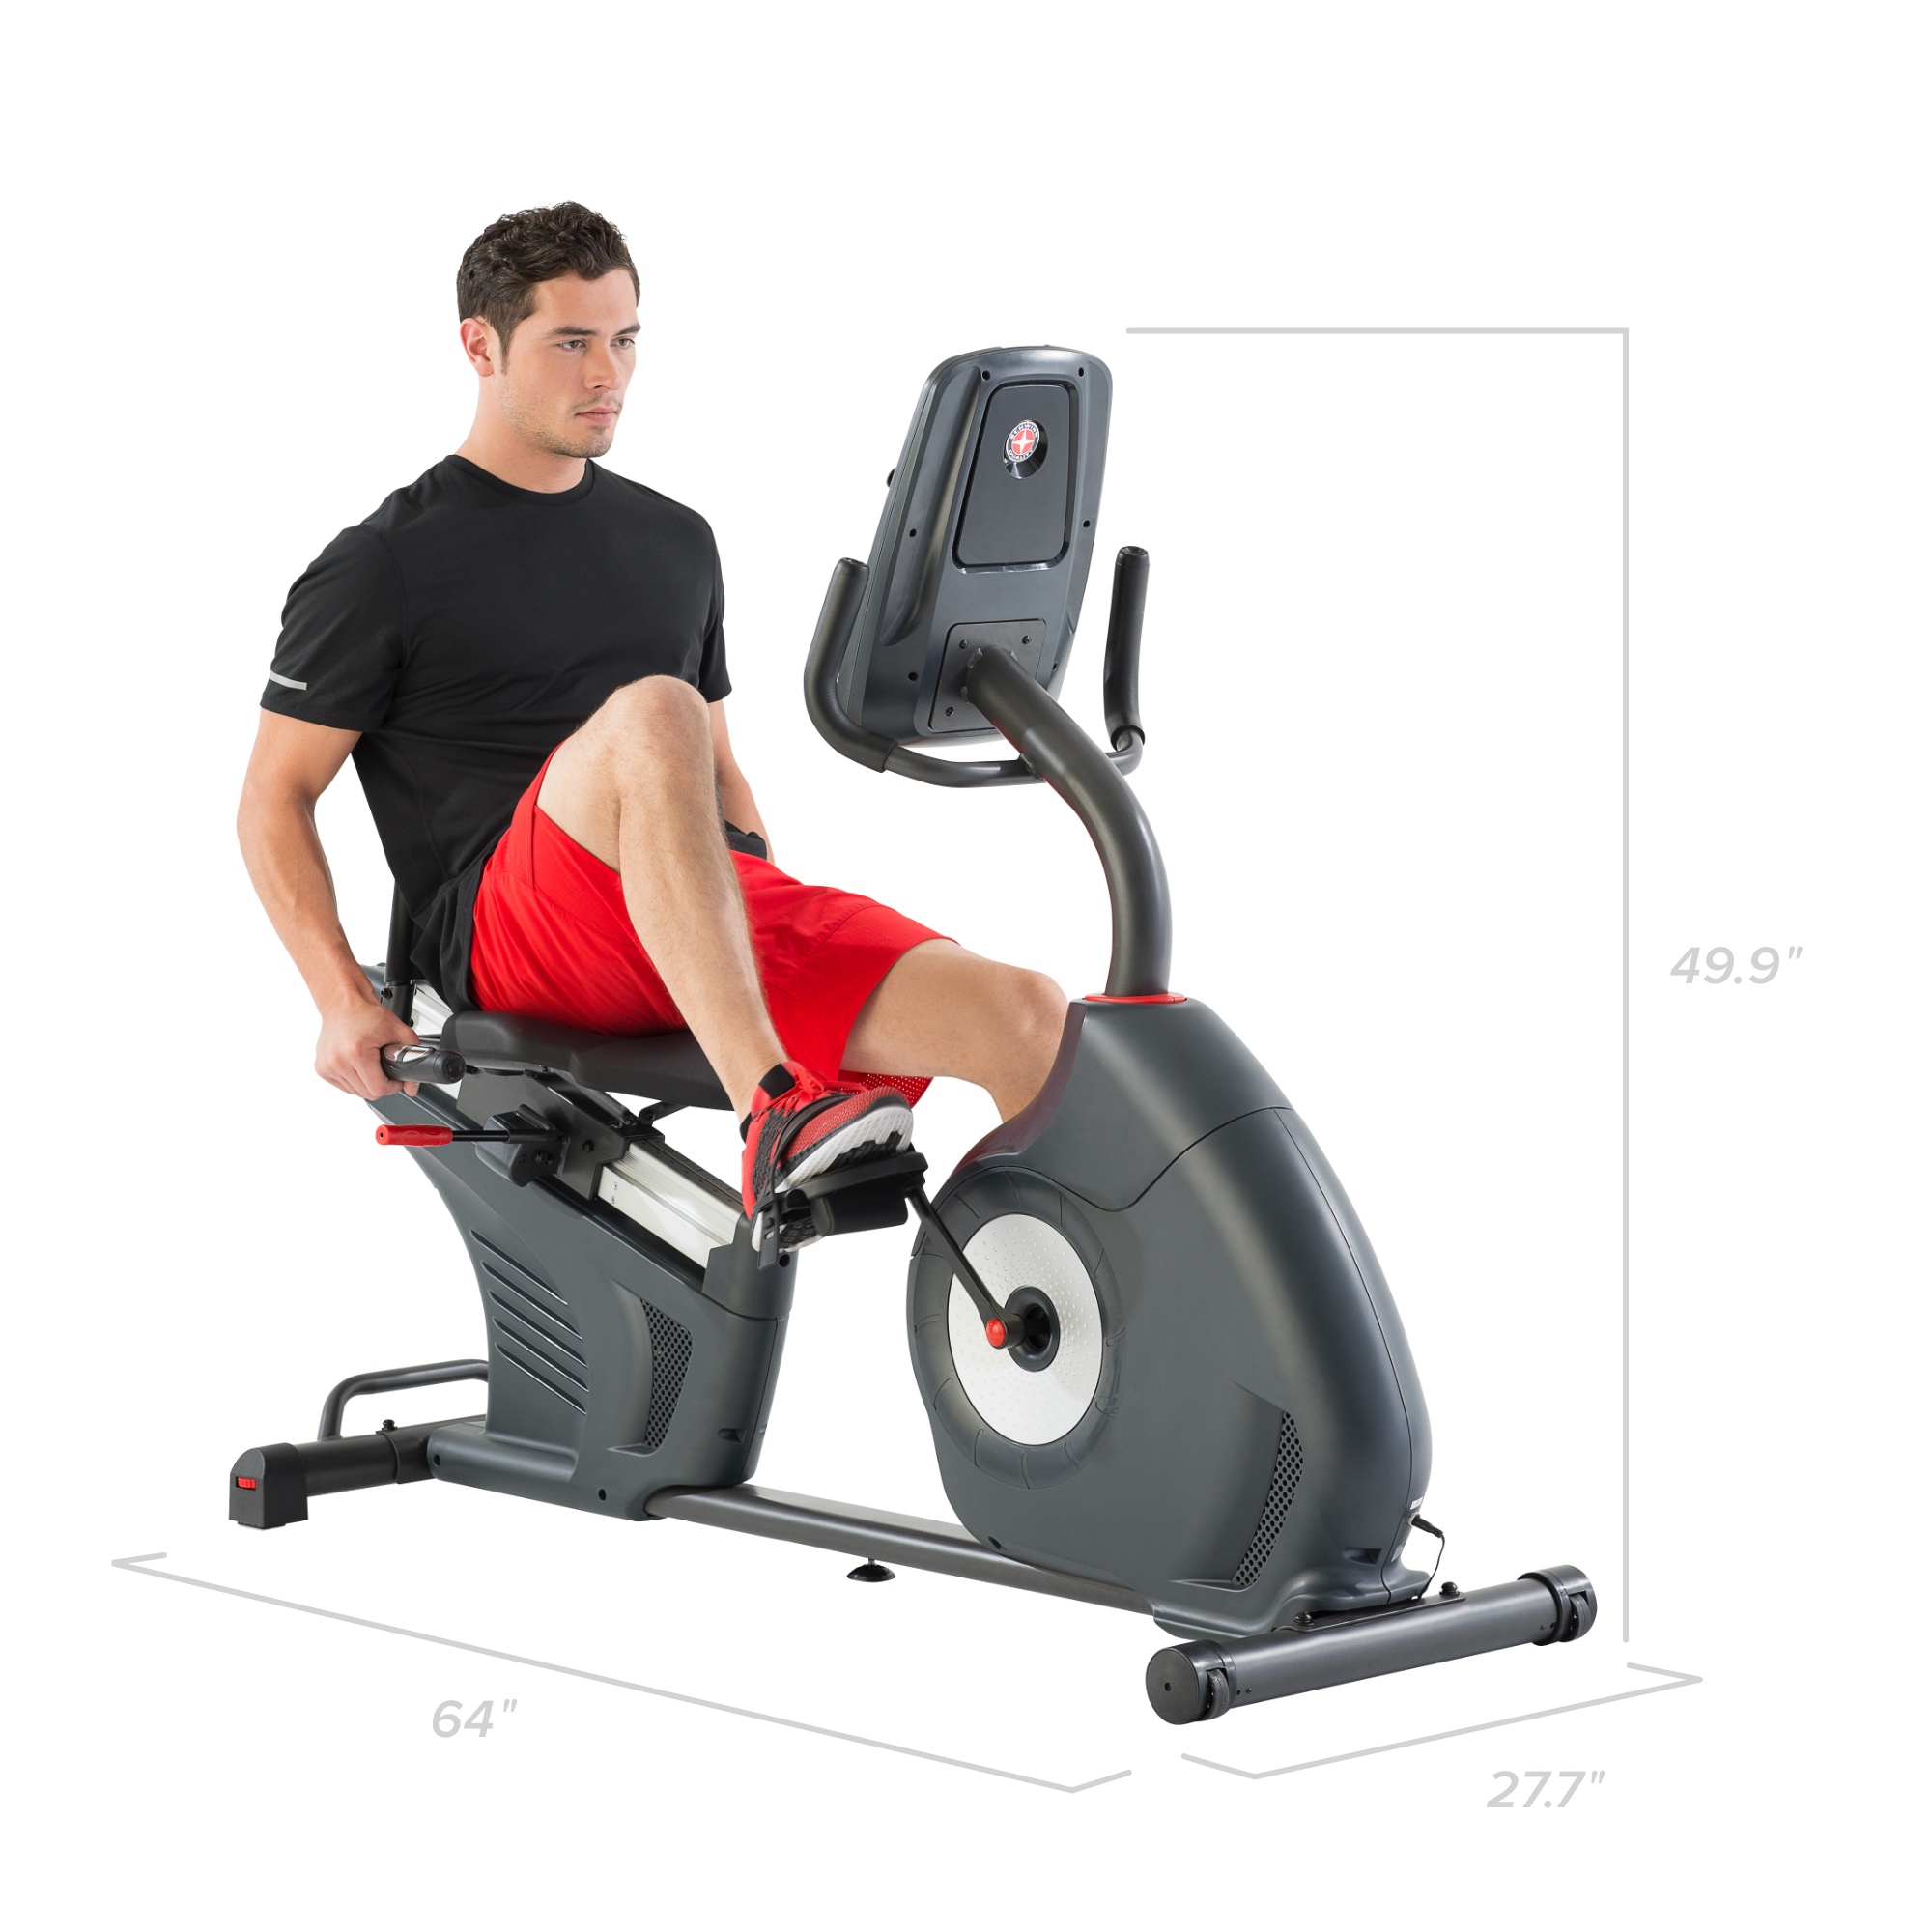 Schwinn 270 Recumbent Exercise Bike with Explore the World Compatibility - image 14 of 14